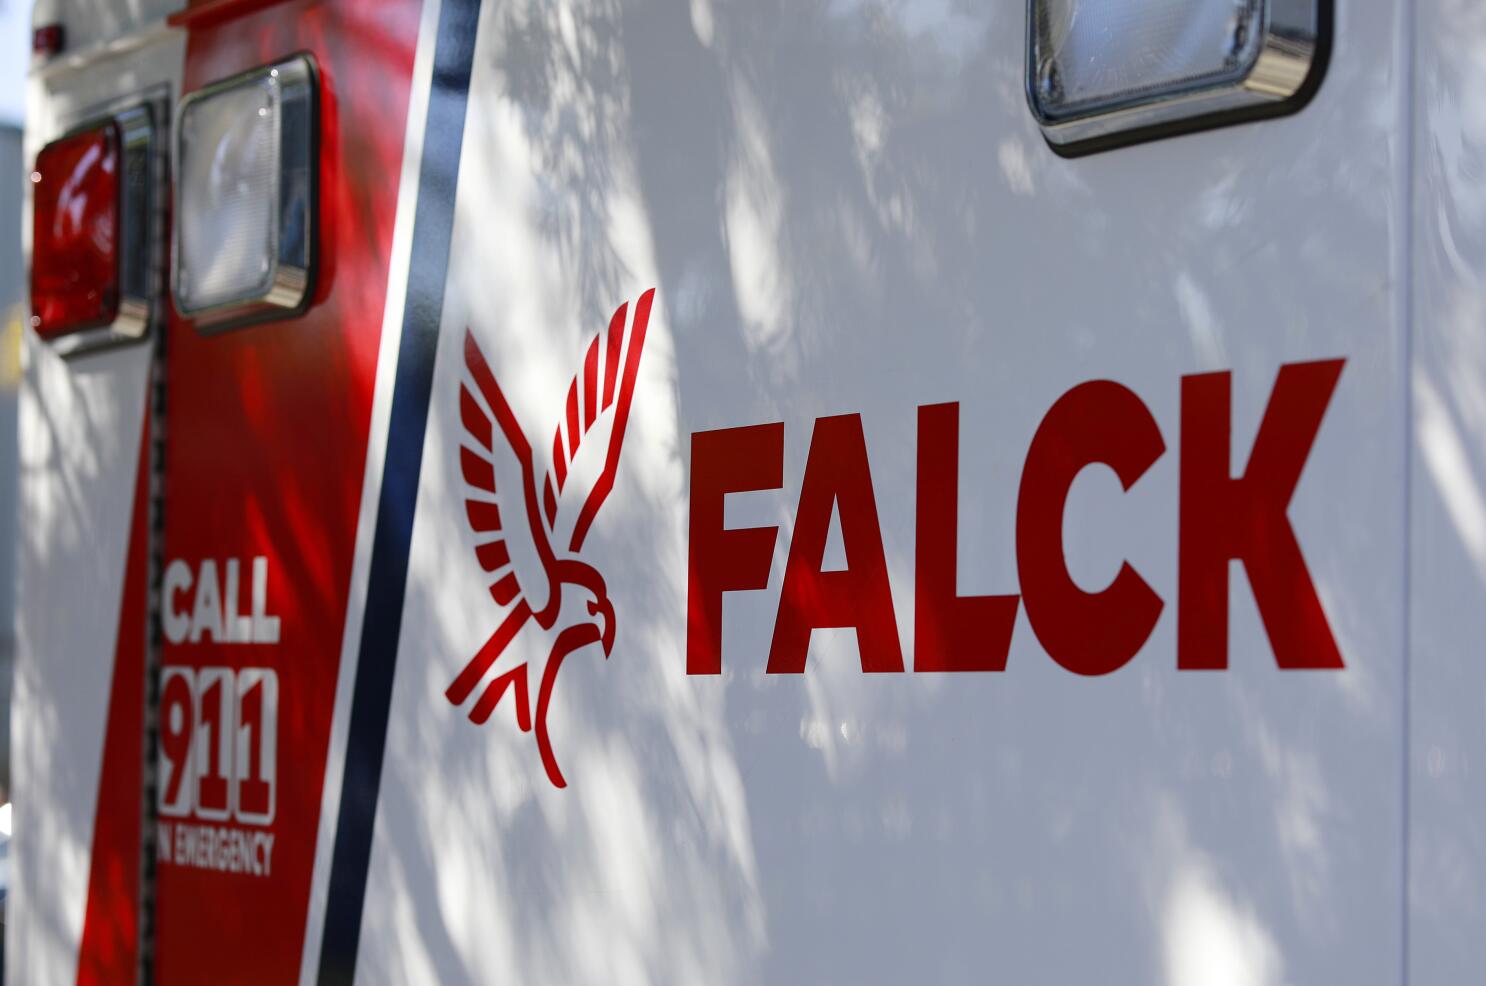 Ambulance called for Rayo Vallecano fan due to suspected heat